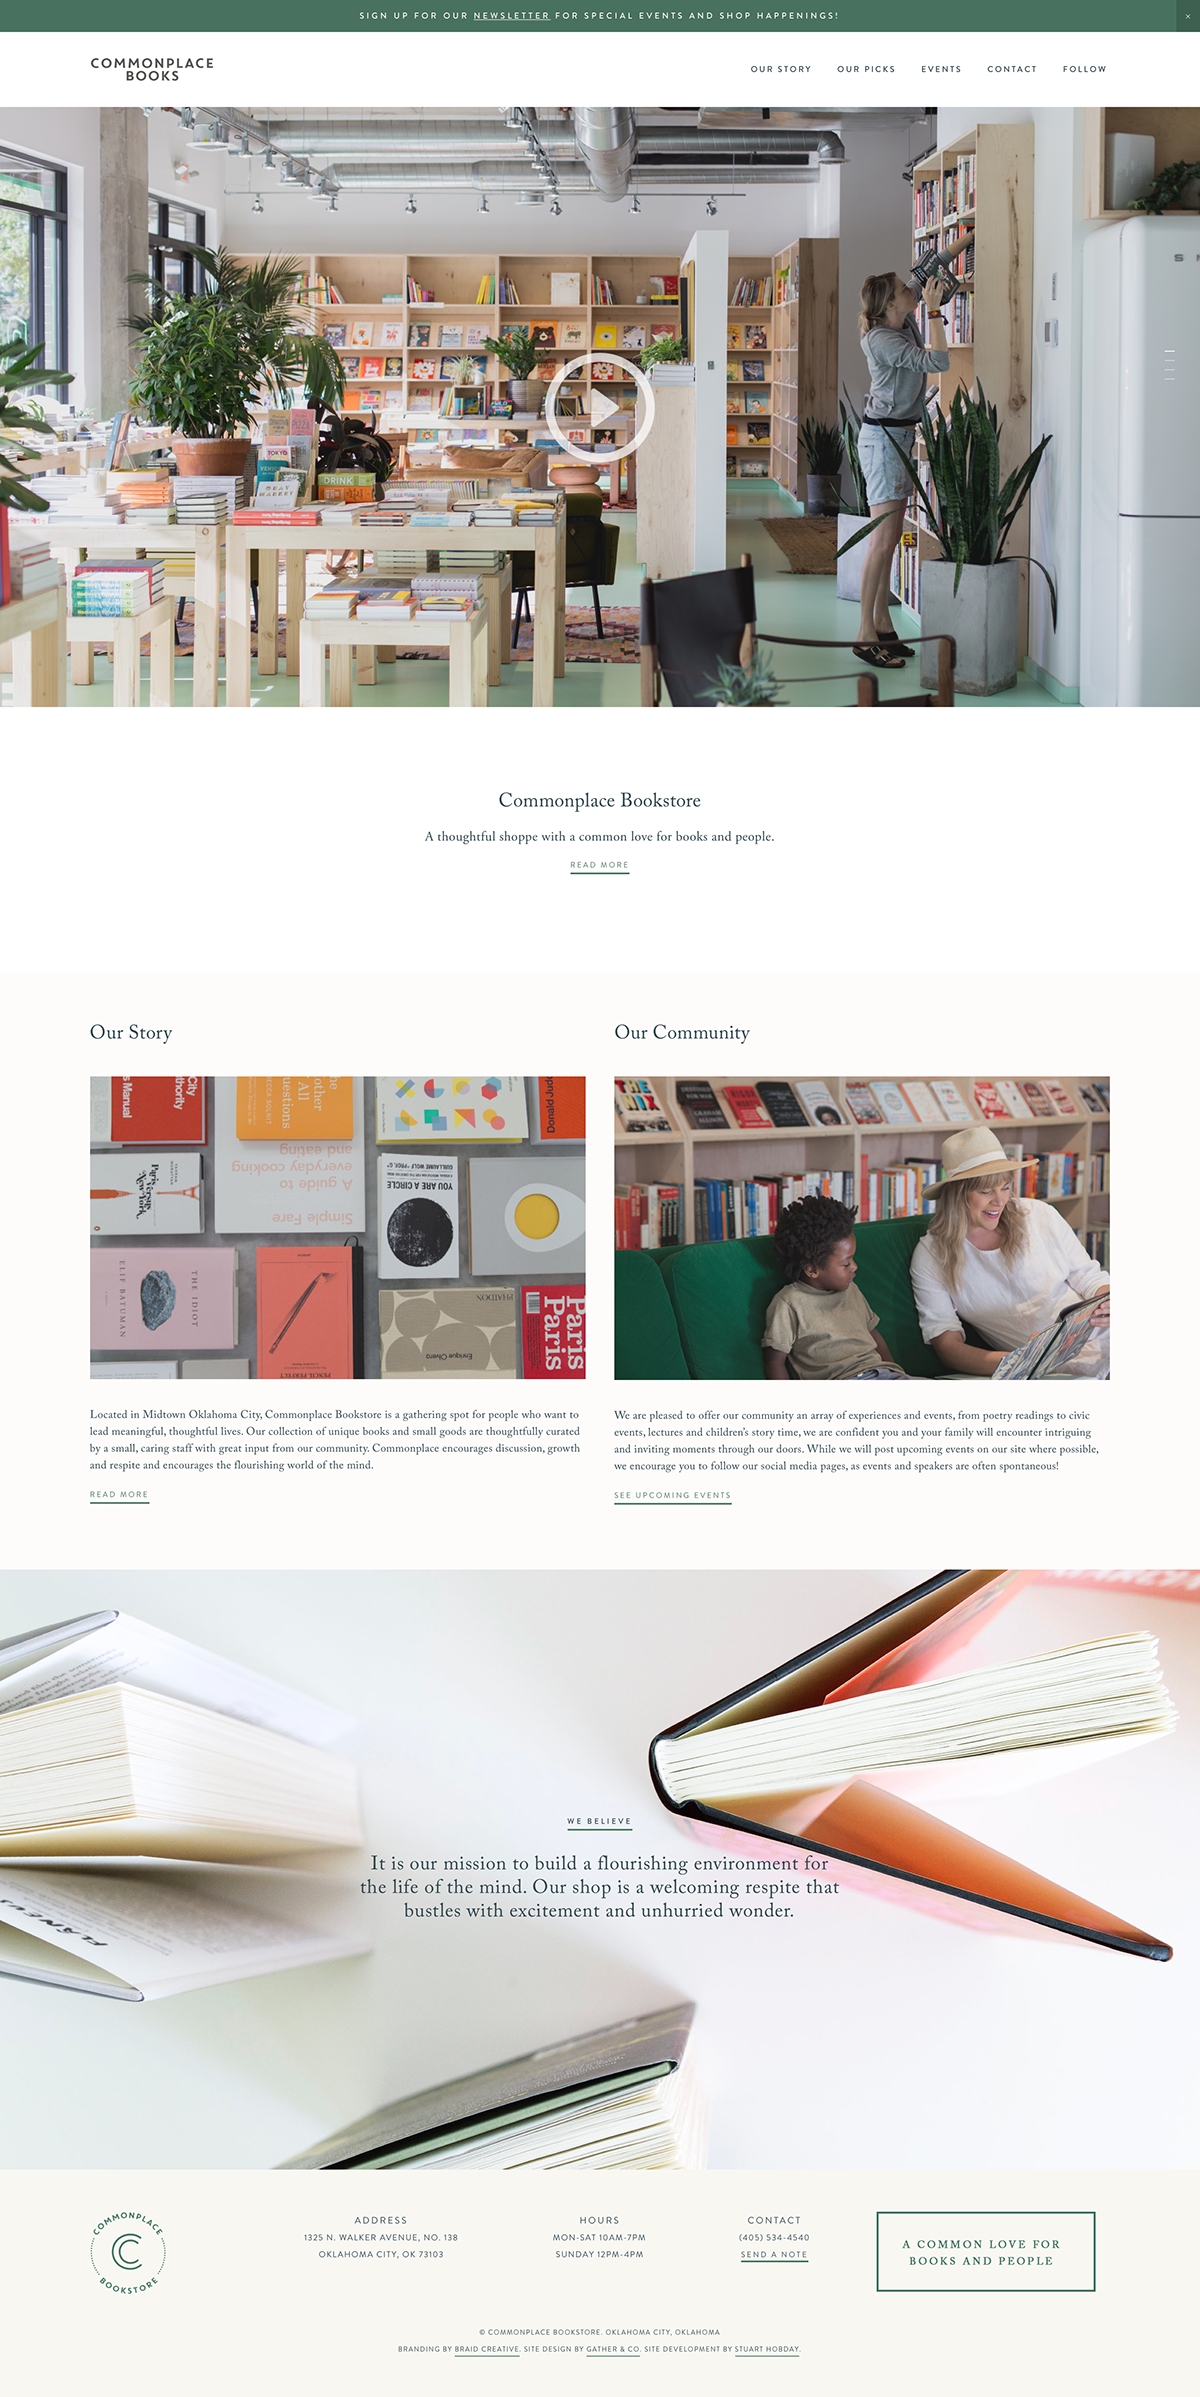 squarespace Commonplace books Gather & Co books grid based Website The Printer's Son